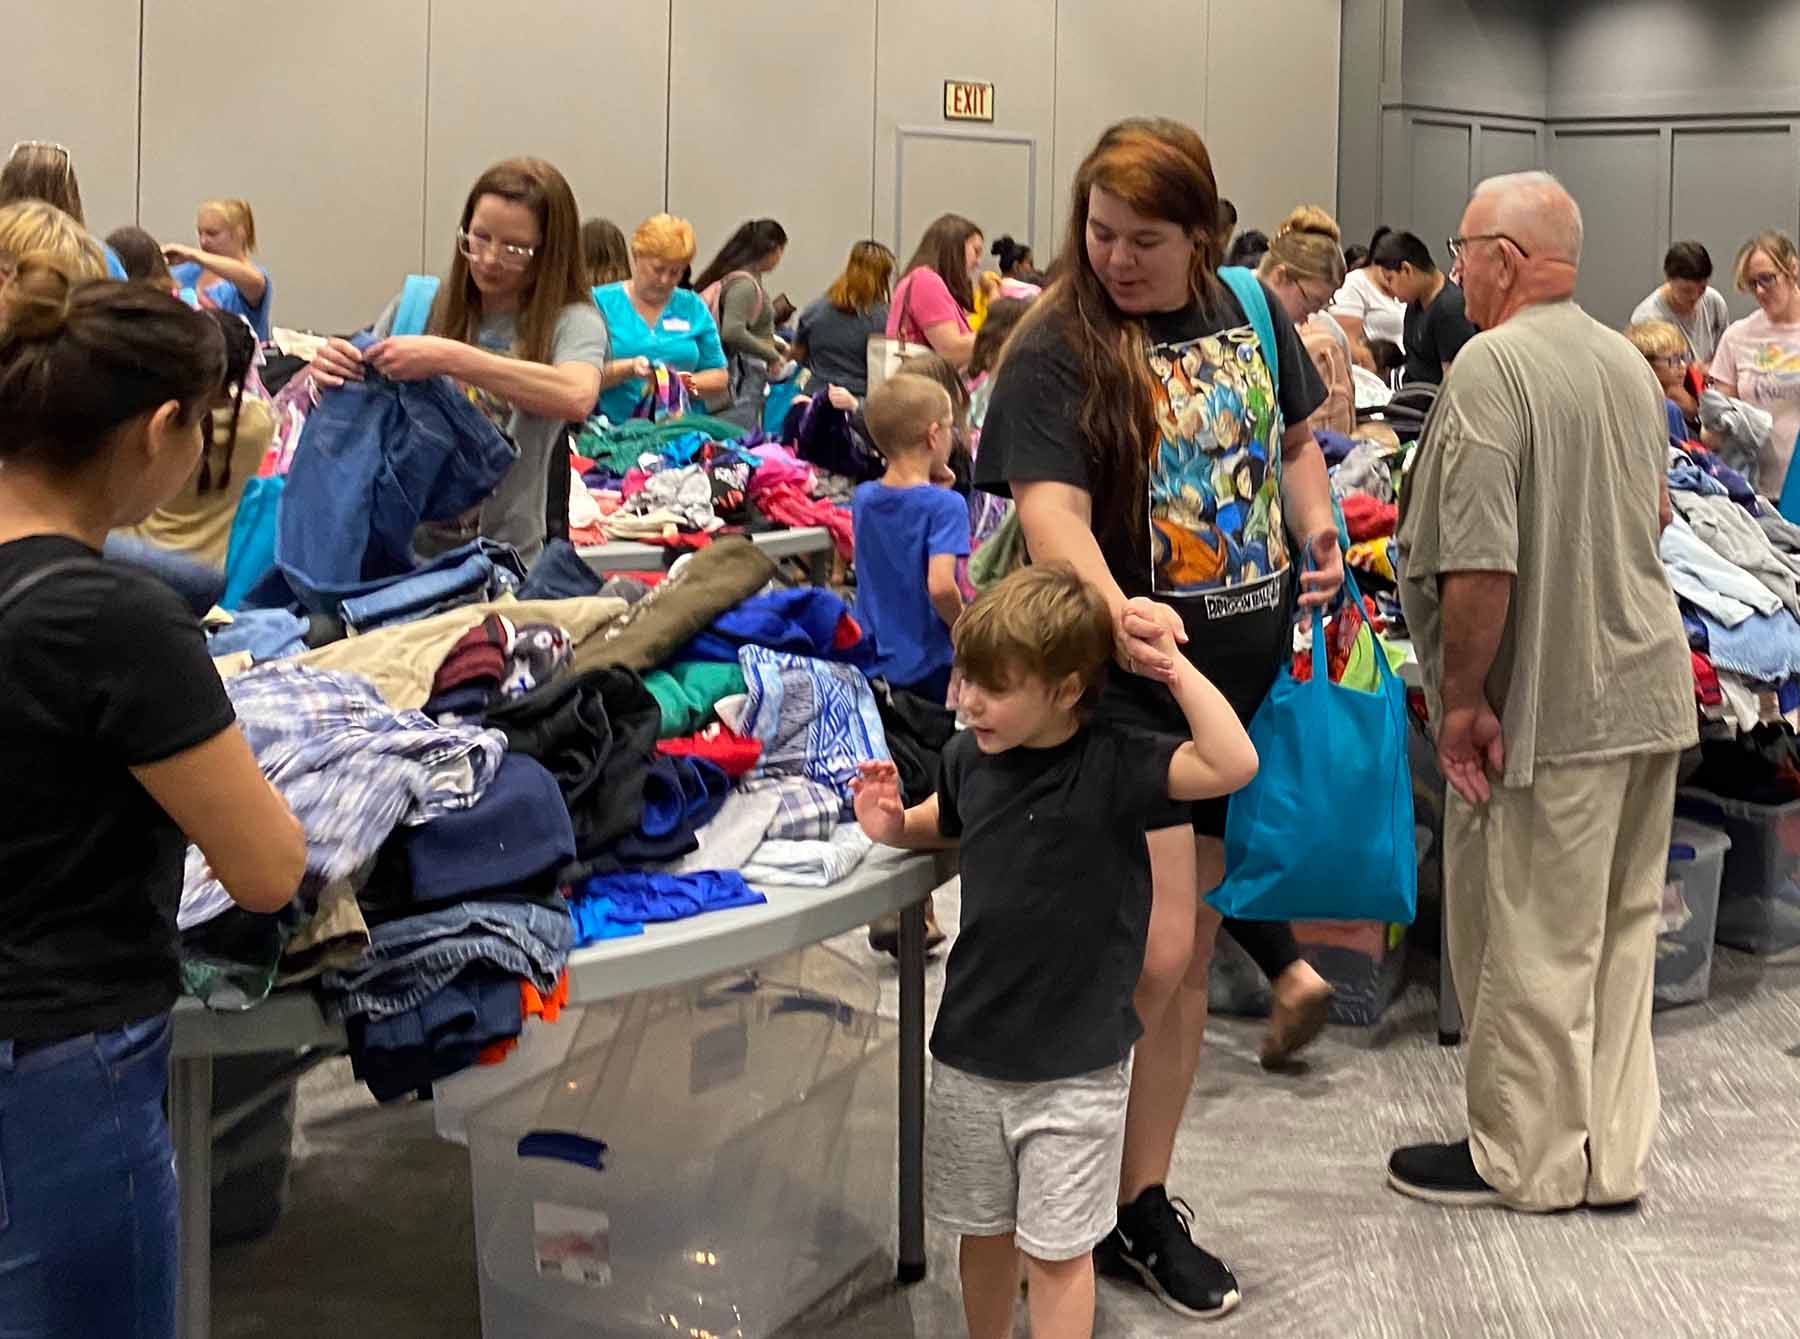 Children and parents looking through clothing.